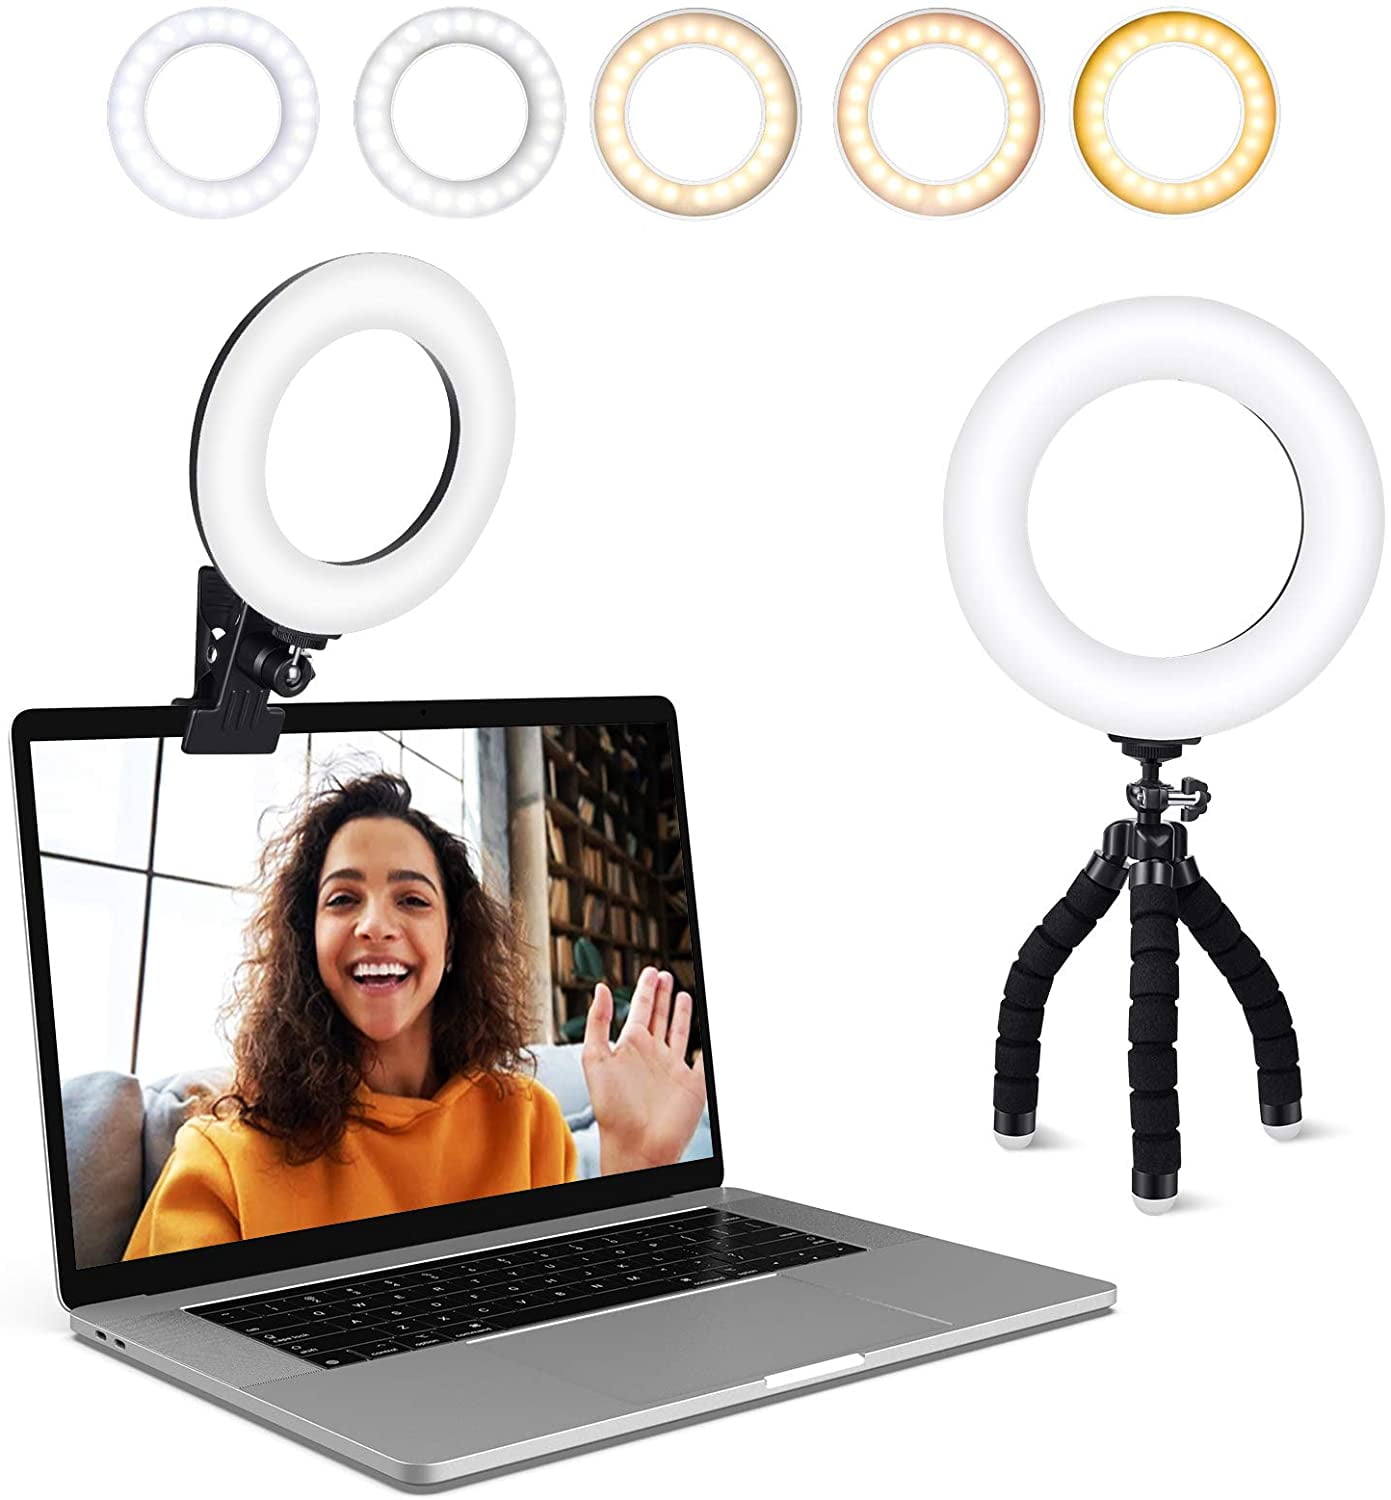 Video Conference Lighting Kit for TikTok YouTube Live Stream,Laptop Webcam Lighting for Remote Working LED Camera Light-Computer Video Lights for Photography,Zoom Calls,Meeting,Broadcasting 